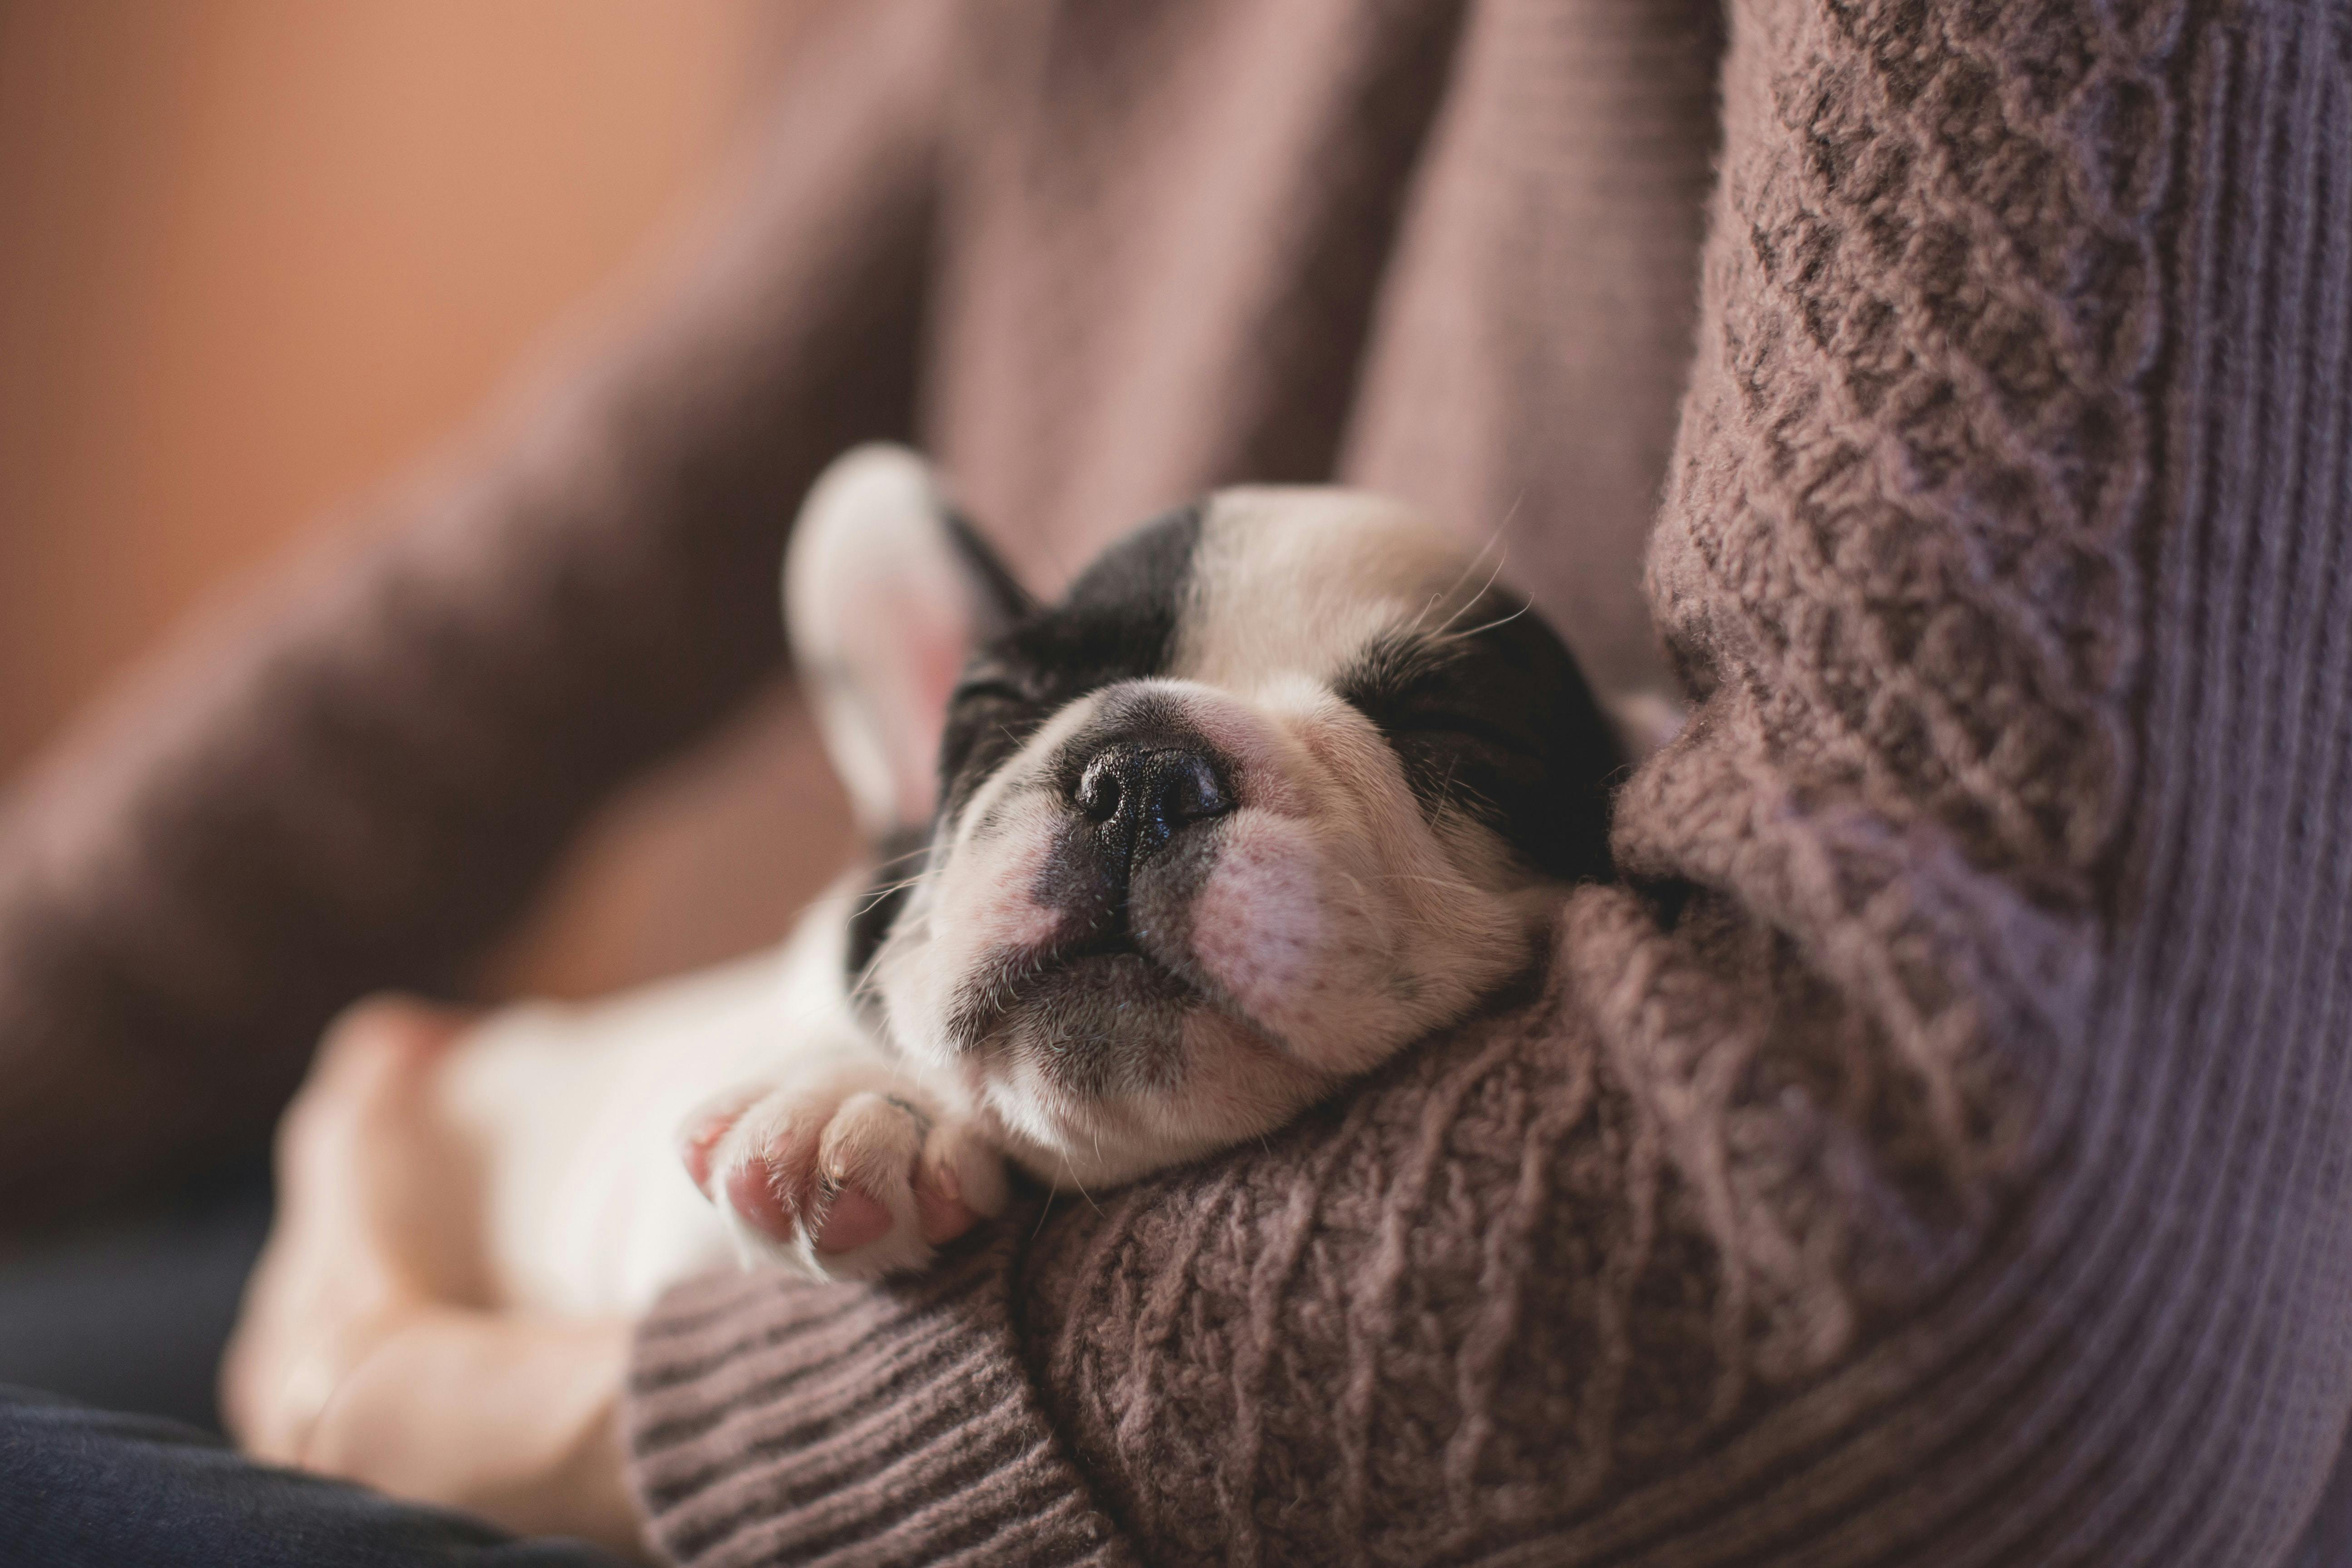 wellness-how-long-does-it-take-for-puppies-to-open-their-eyes-hero-image